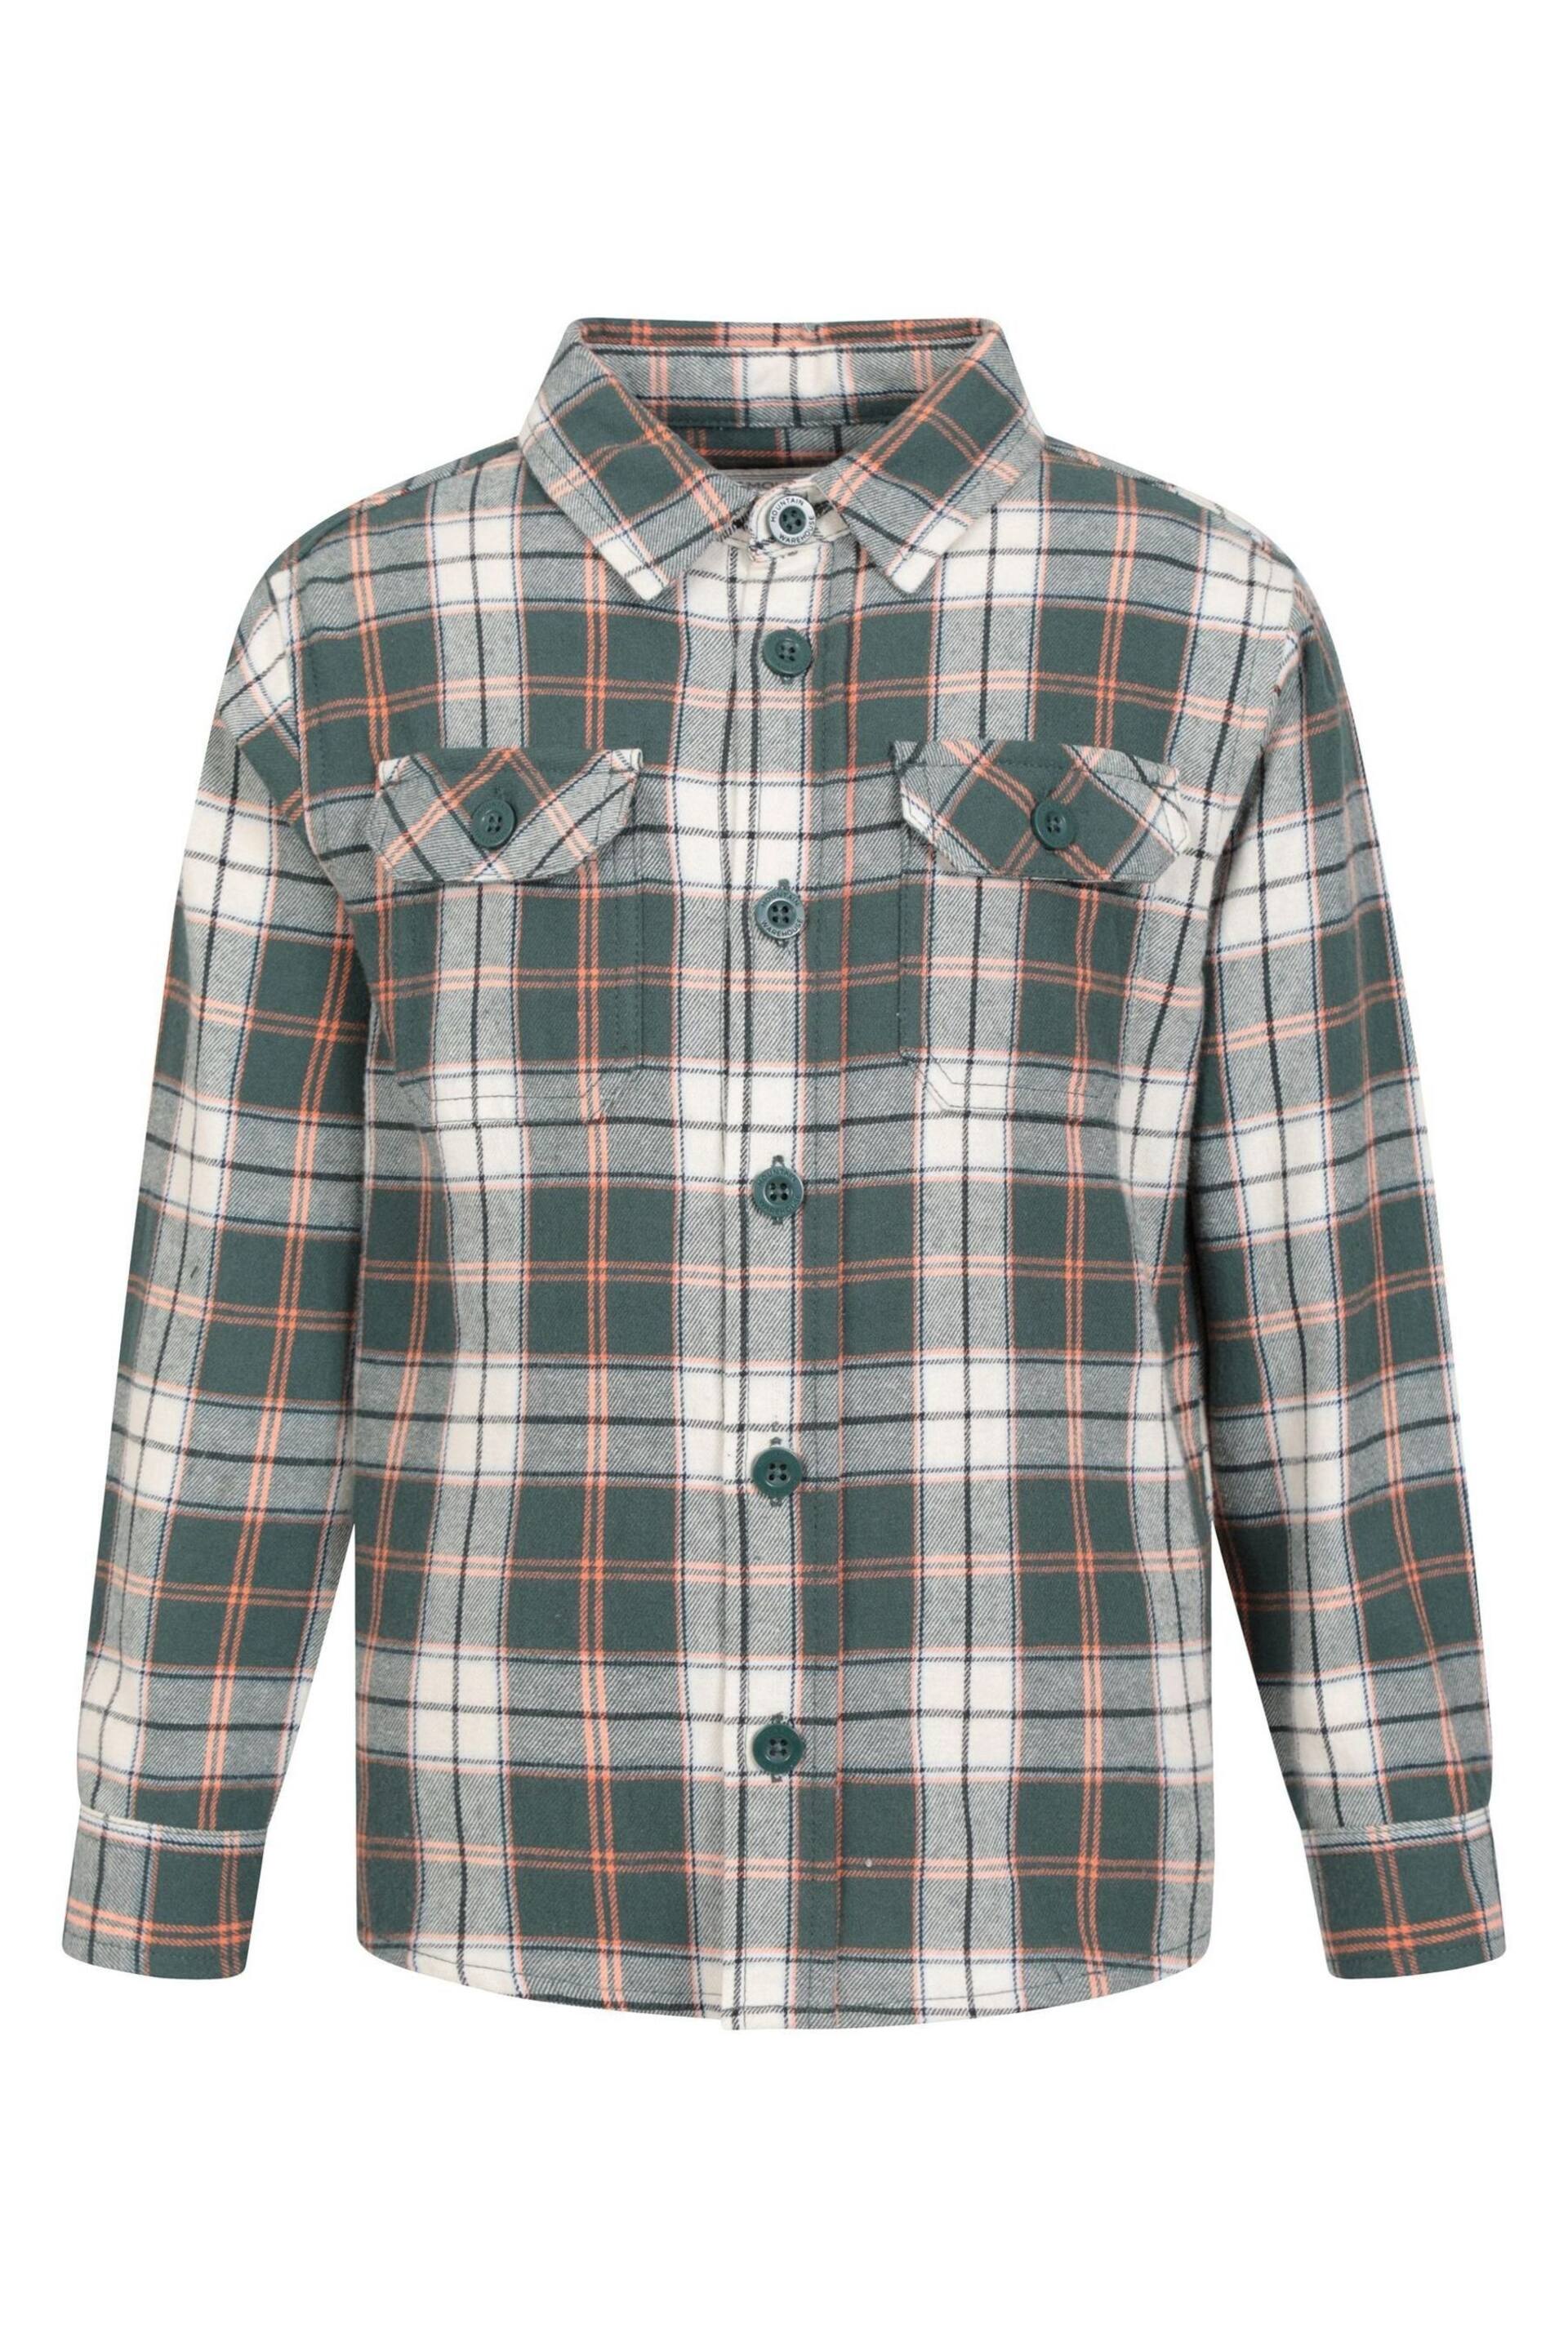 Mountain Warehouse Green Kids Flannel Check Shirt - Image 1 of 5